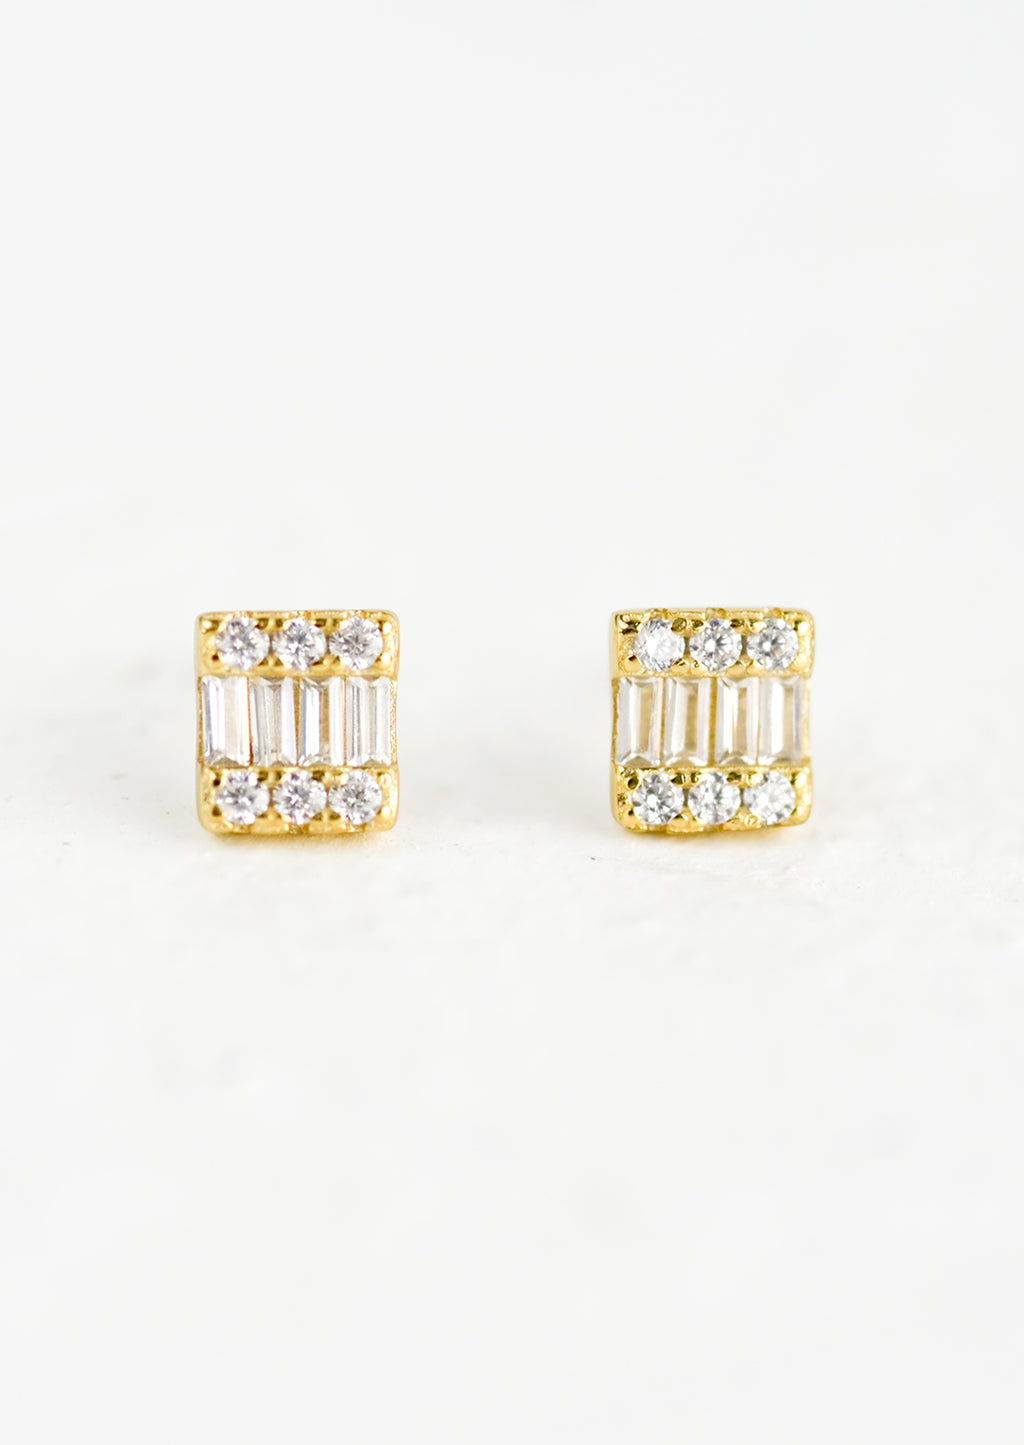 3: Square gold stud earrings with art deco look and sparkling cubic zirconia.